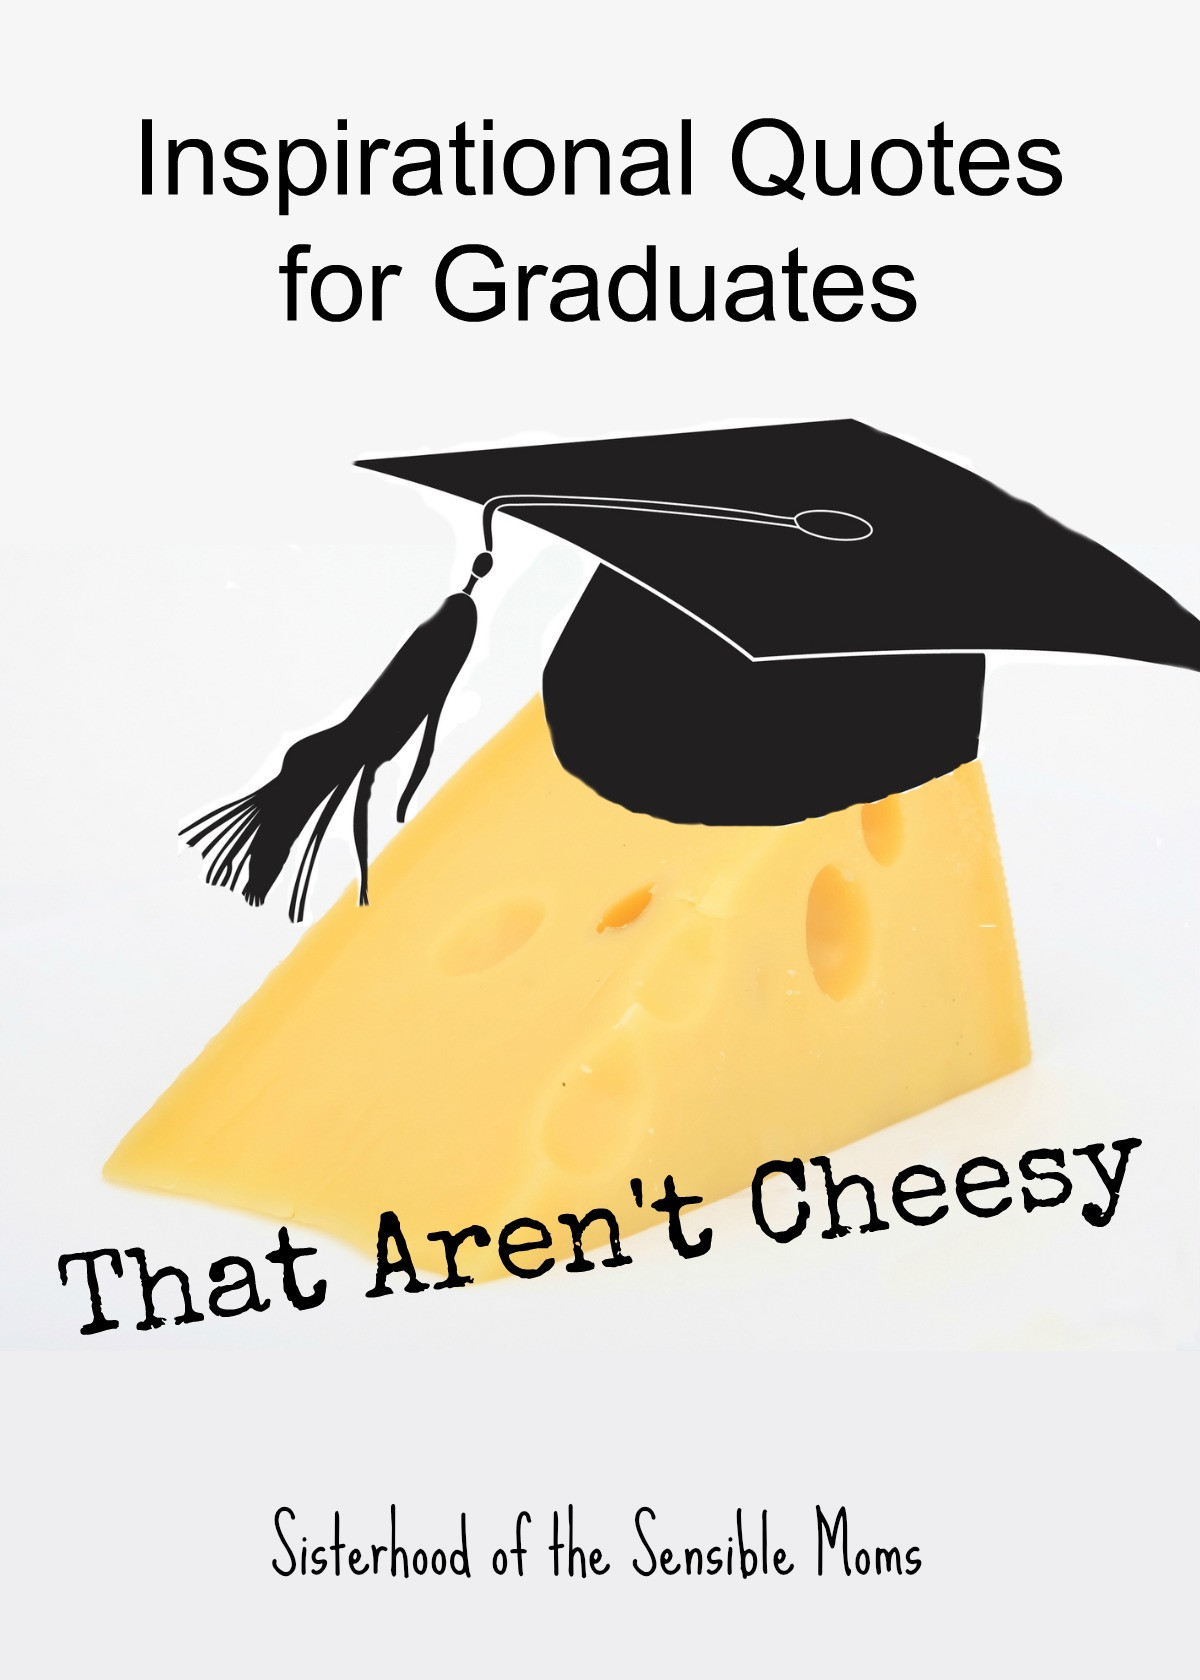 Quotes For Graduation
 Inspirational Quotes for Graduates That Aren t Cheesy